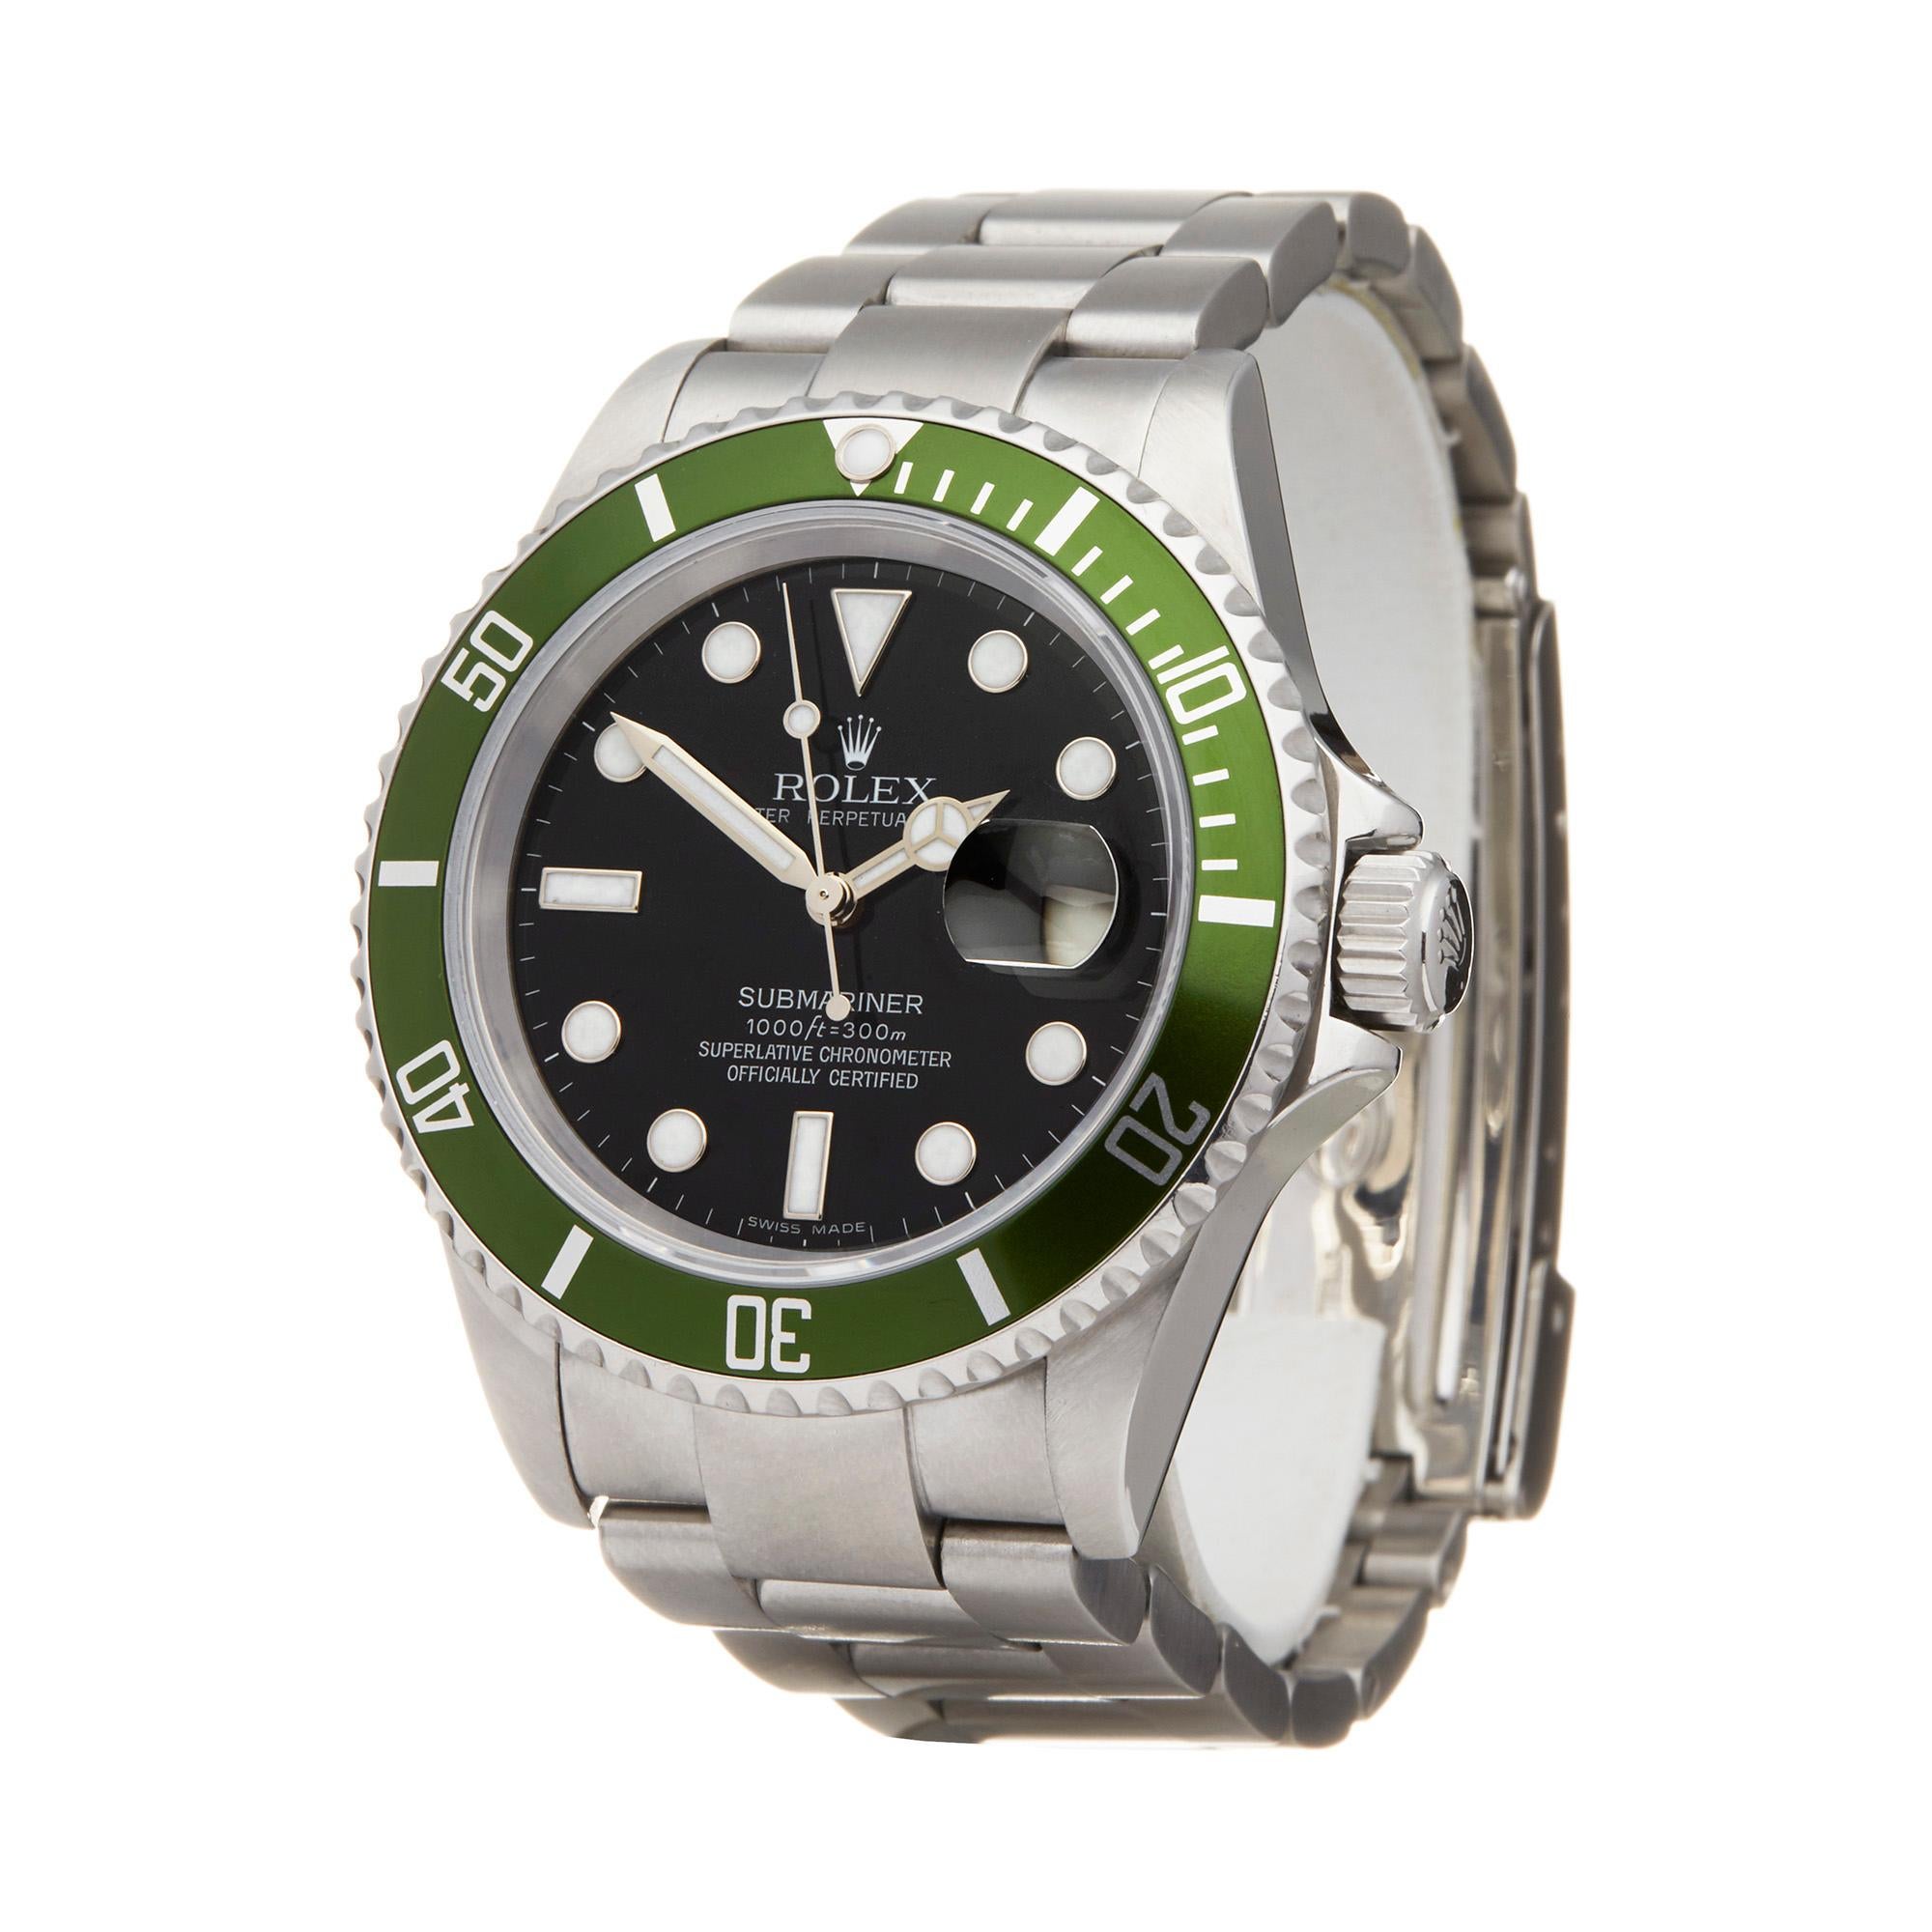 Ref: W5909
Manufacturer: Rolex
Model: Submariner
Model Ref: 16610LV
Age: 12 December 2006
Gender: Mens
Complete With: Box, Manuals & Guarantee
Dial: Black
Glass: Plexiglass
Movement: Automatic
Water Resistance: To Manufacturers Specifications
Case: